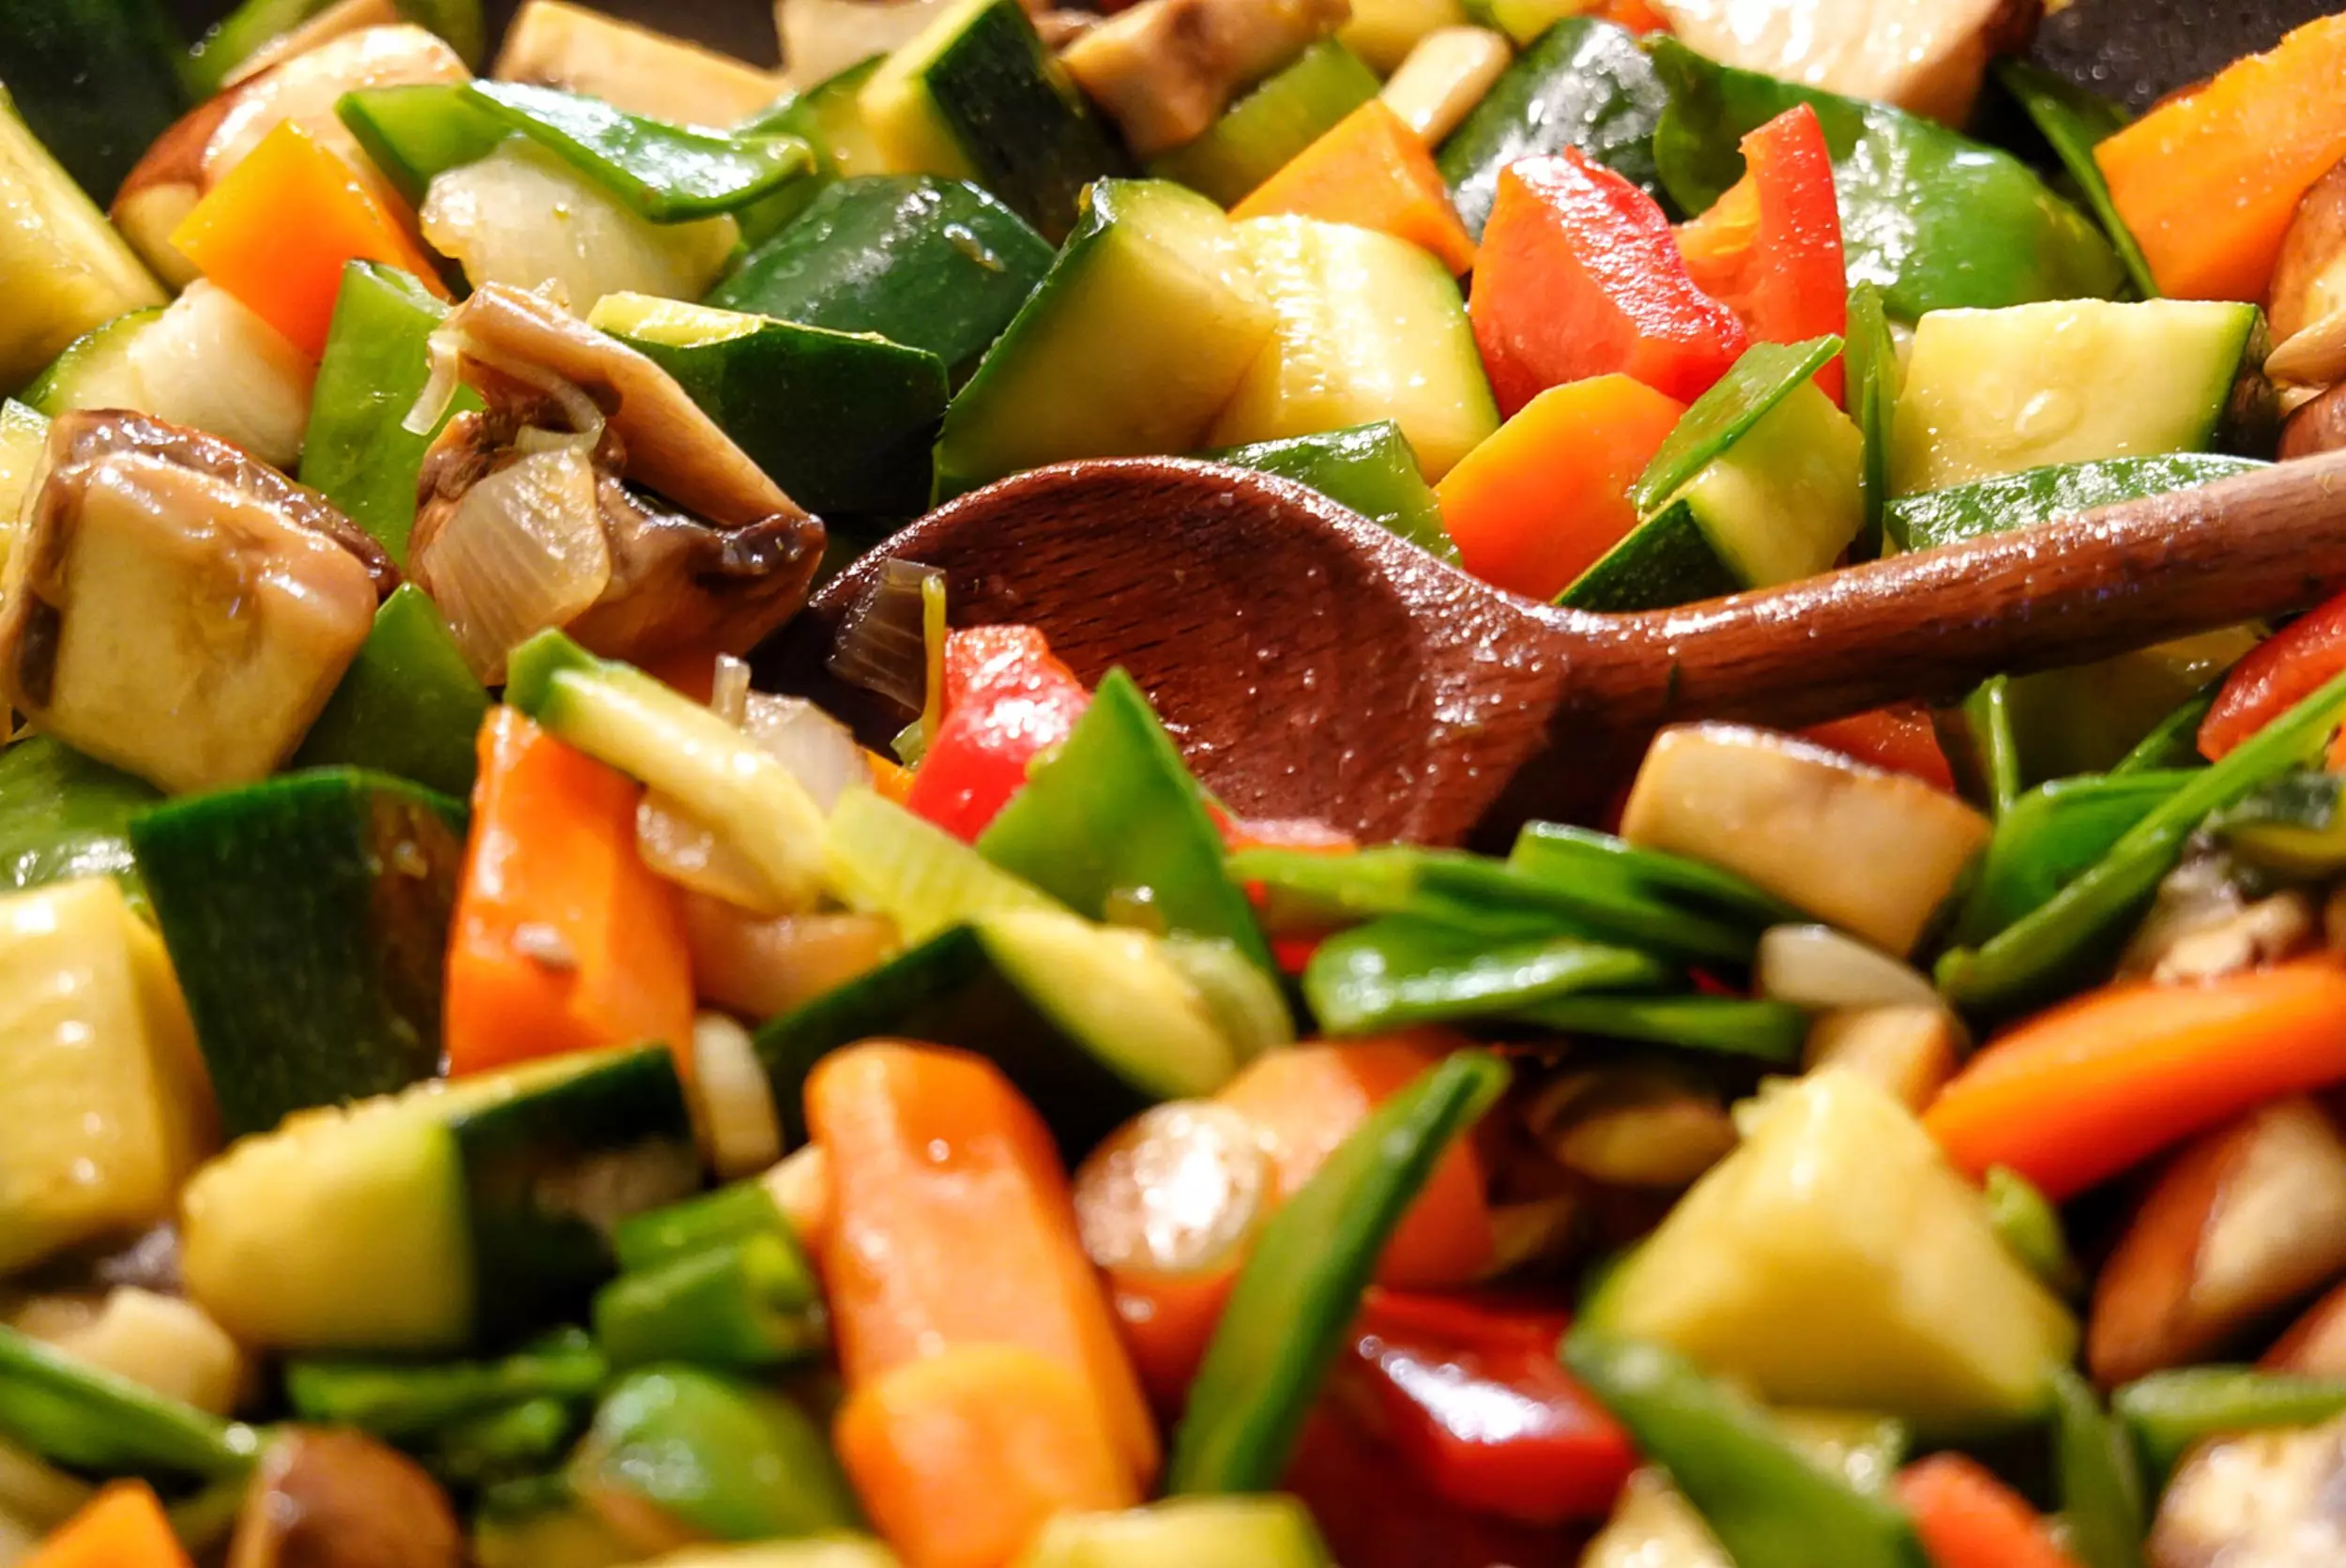 Veggie stir fries are a good way to make sure you are getting as many nutrients as possible.